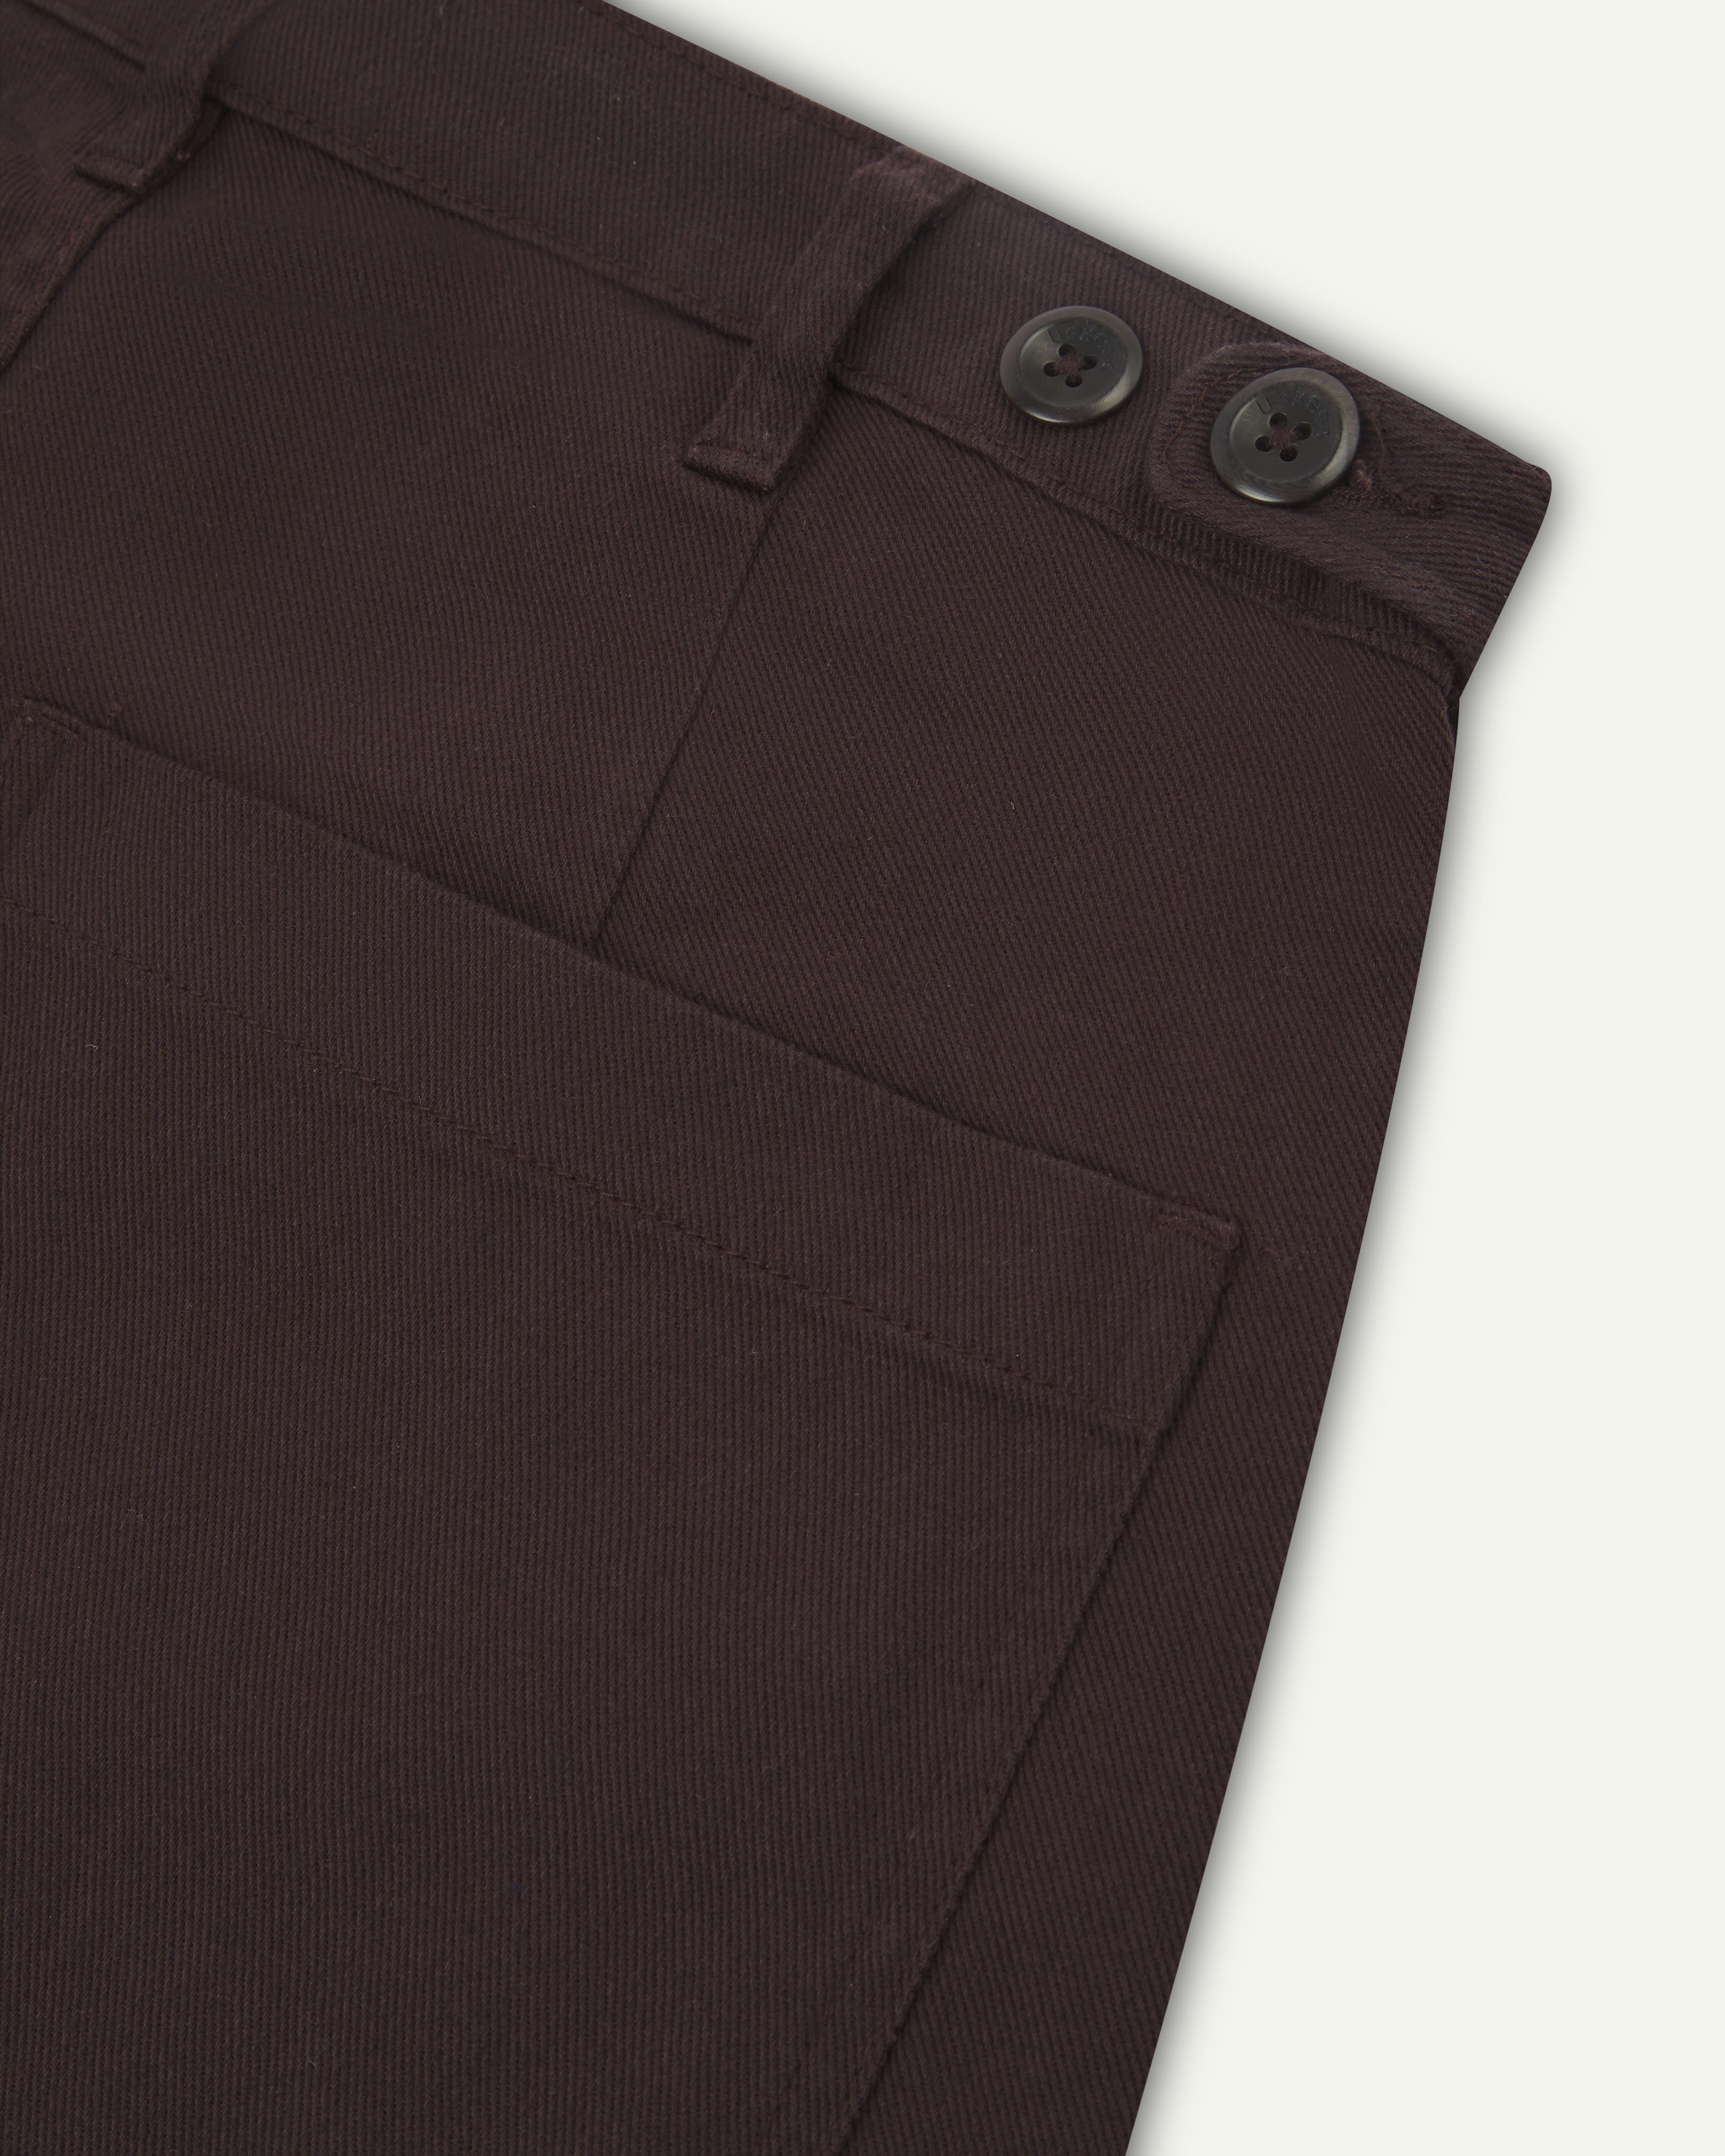 Flat shot back view of uskees dark plum drill trousers showing back pocket and waistband detail